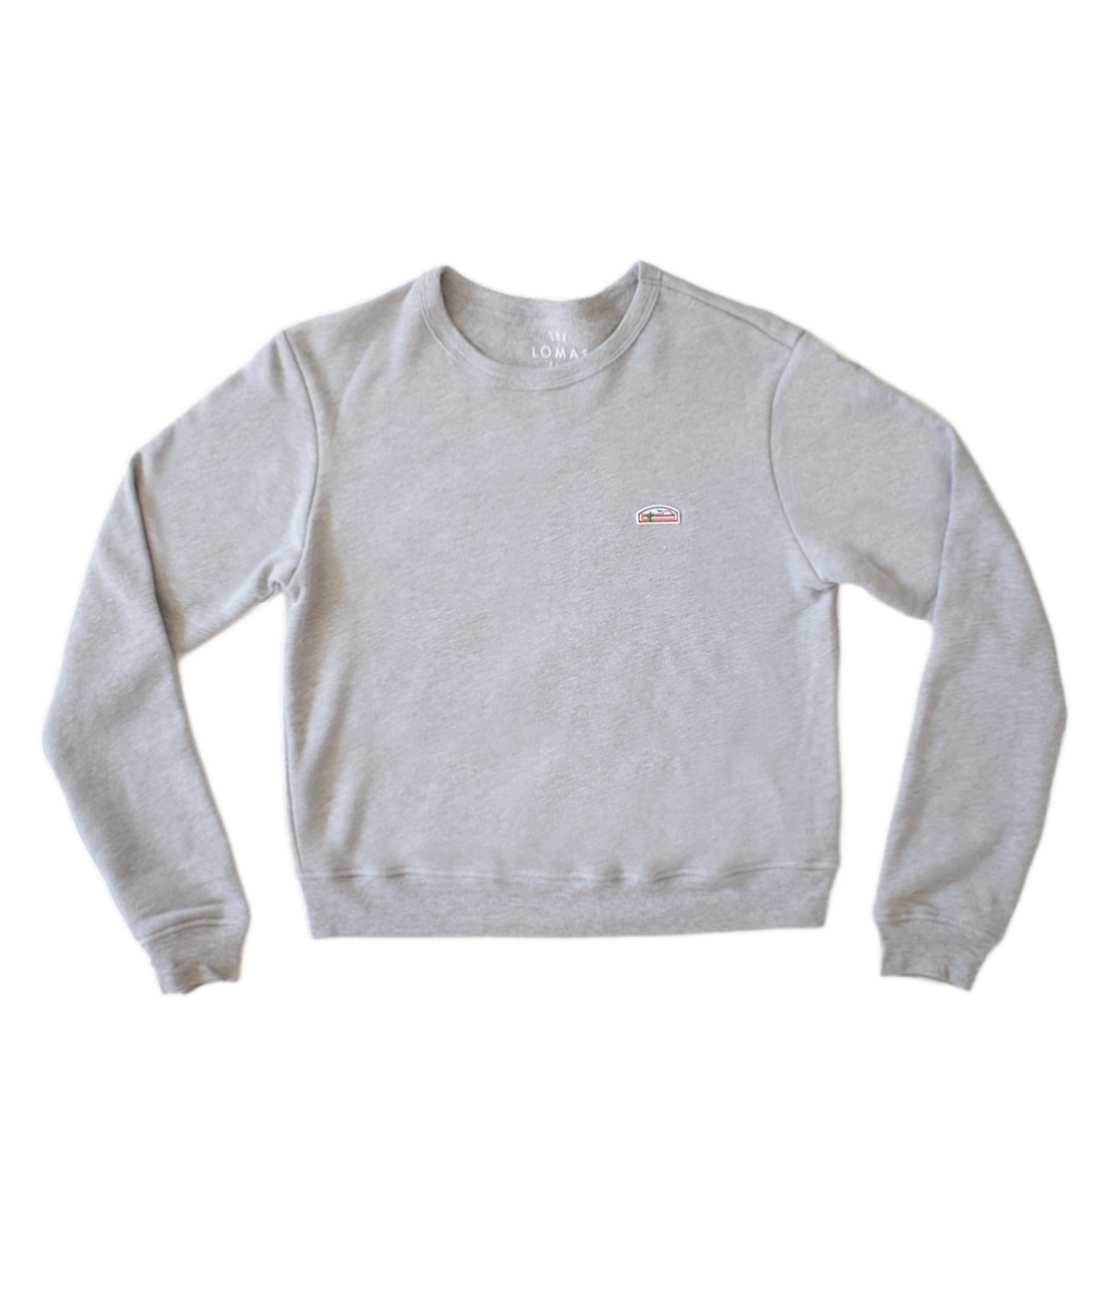 Thick yet breathable and feather soft grey crewneck sweatshirt with a shorter fit just above the waist. The upper left portion of the sweatshirt bears The Lomas Brand's iconic patch, executed in a striking tri-color scheme of white, orange, and green. The design features a saguaro with reaching limbs, an airborne bird, and an emerging sun.